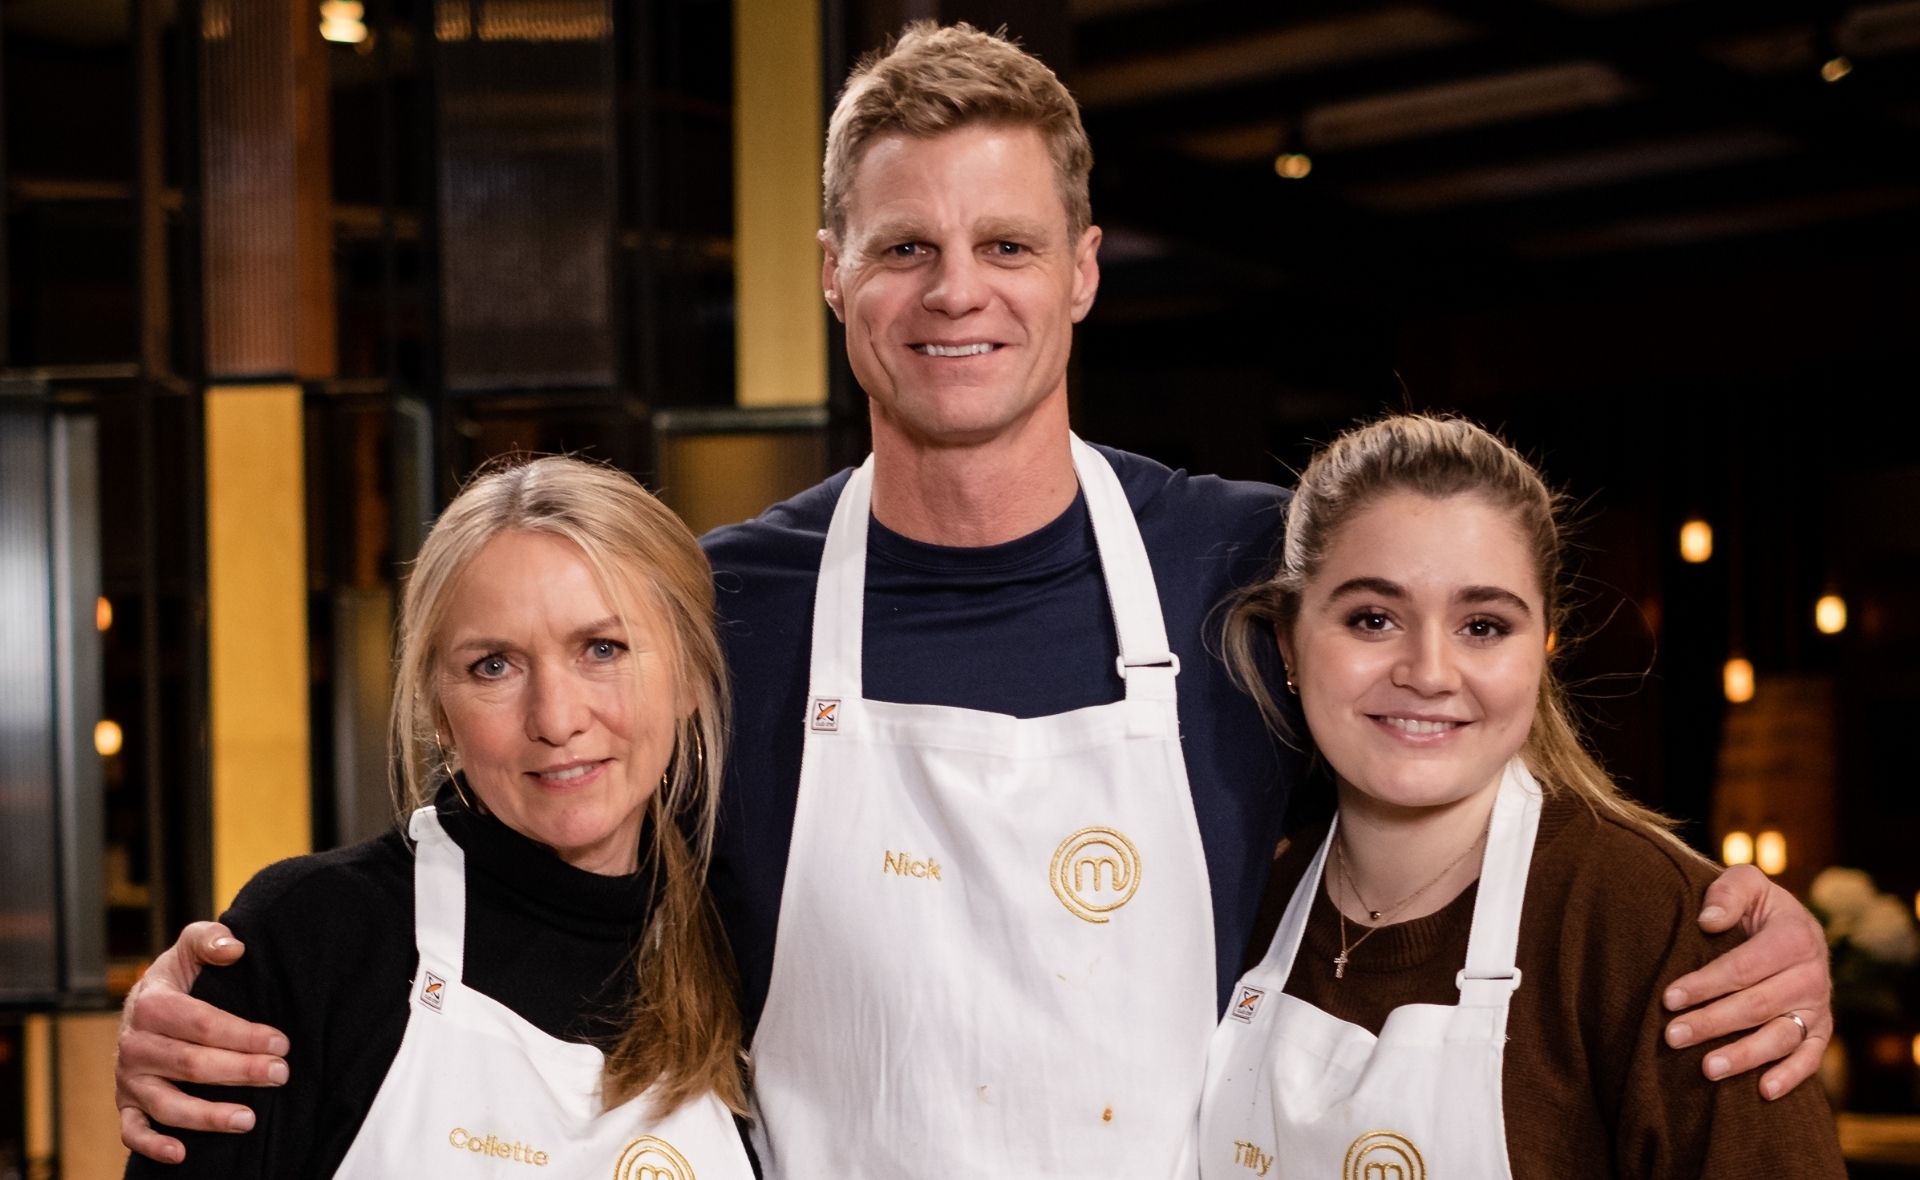 The Celebrity MasterChef final is almost here, and the favourite to win is not who you expect